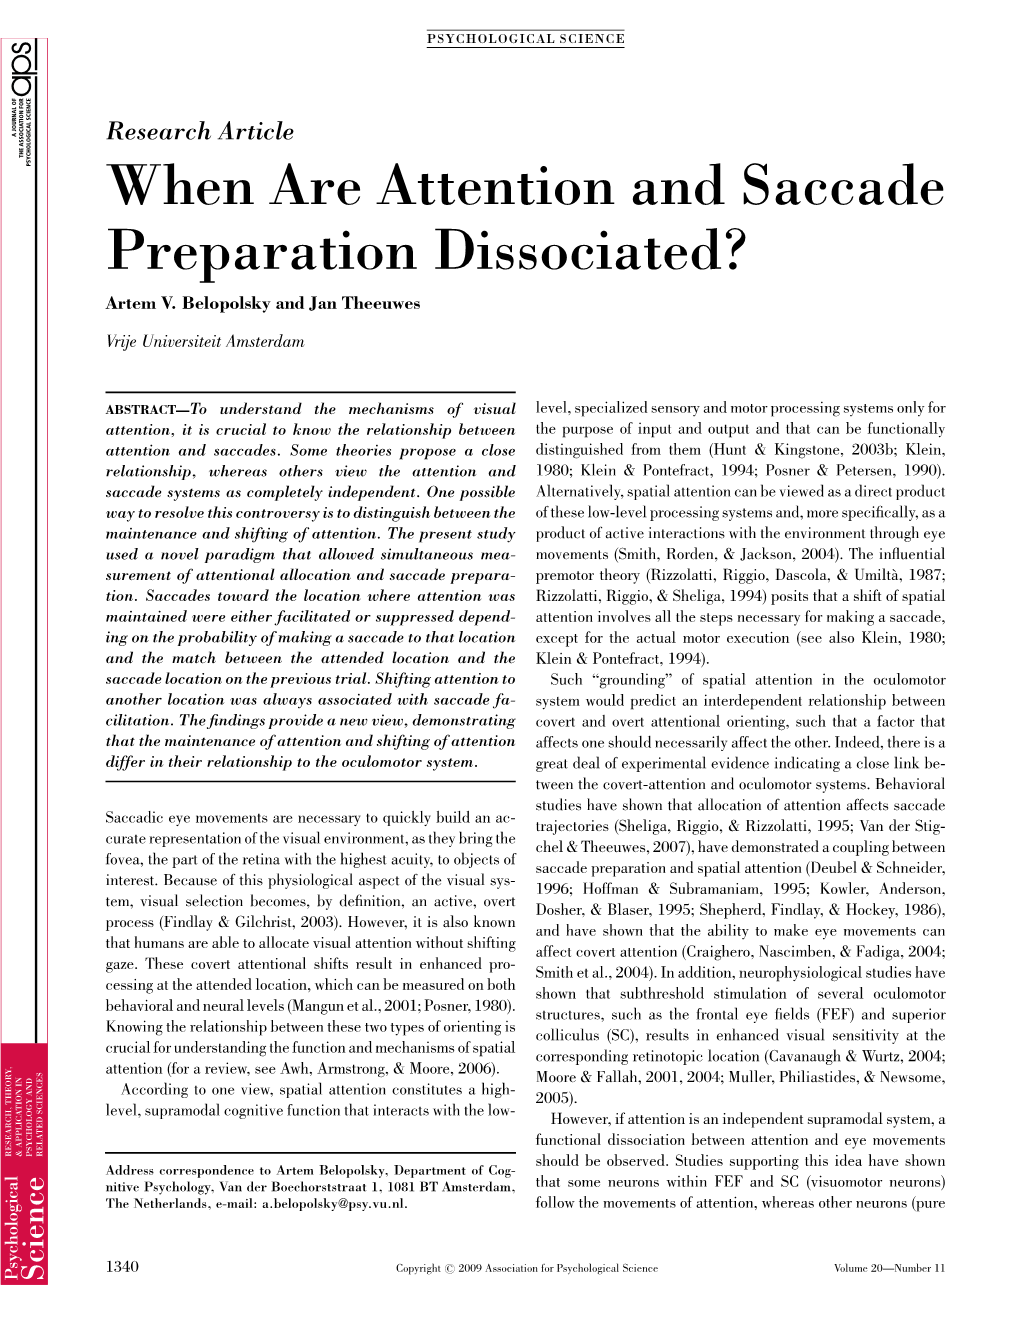 When Are Attention and Saccade Preparation Dissociated? Artem V